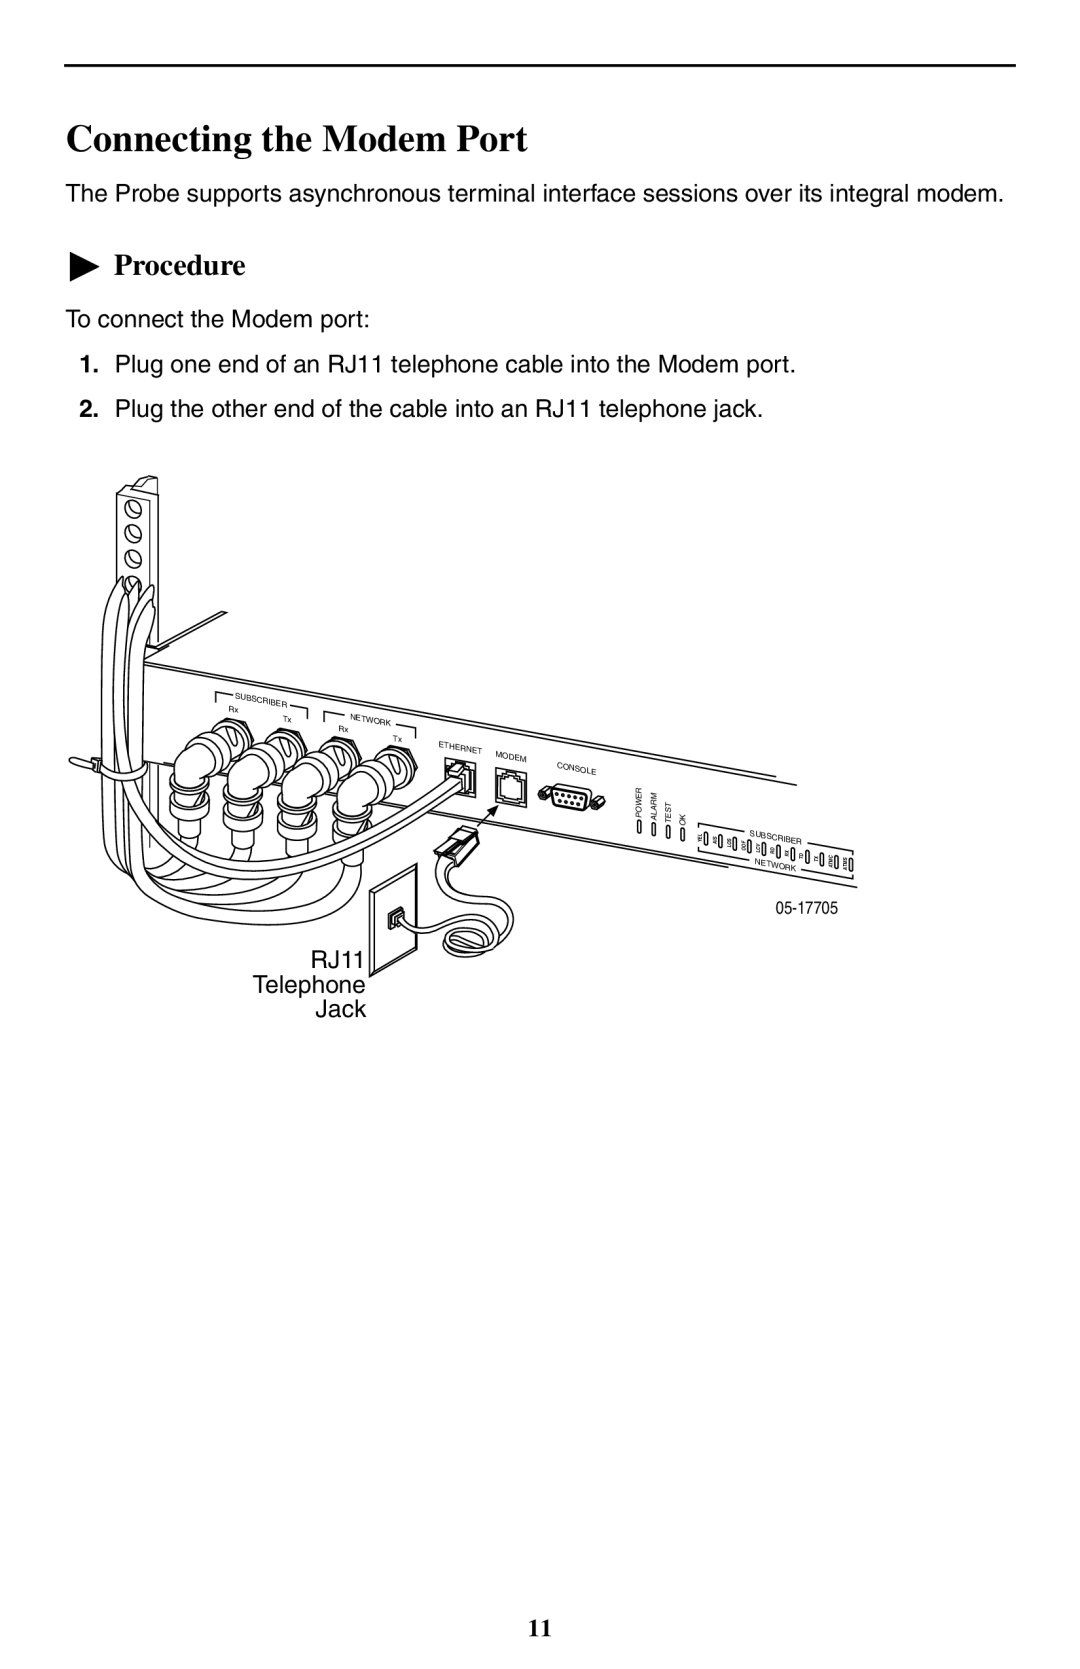 Paradyne 9550 DS3 installation instructions Connecting the Modem Port, Procedure 